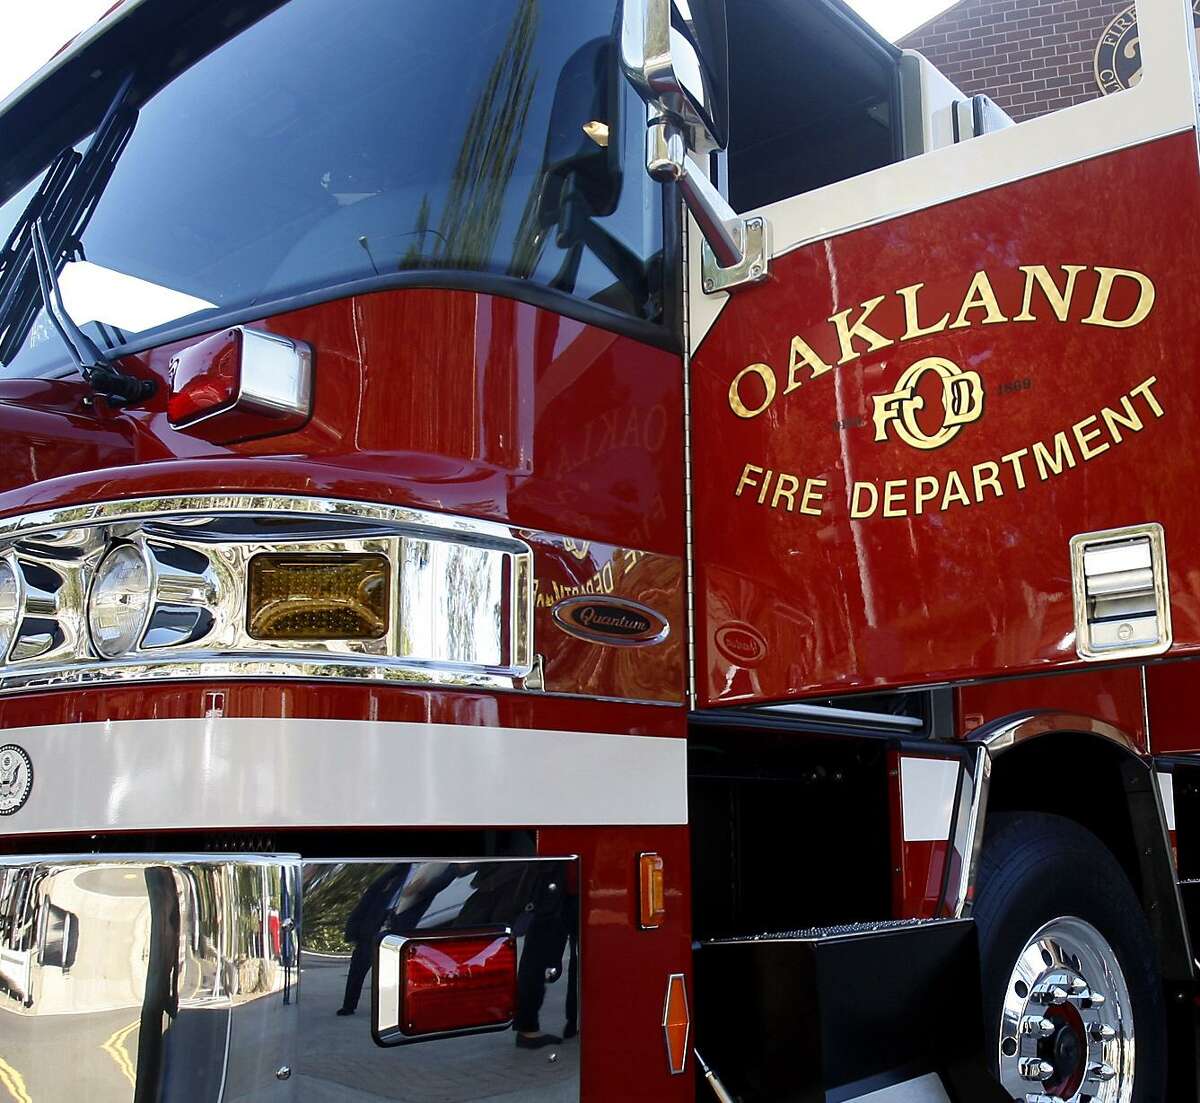 This file photograph shows an Oakland Fire Department engine outside of a fire station in Oakland.